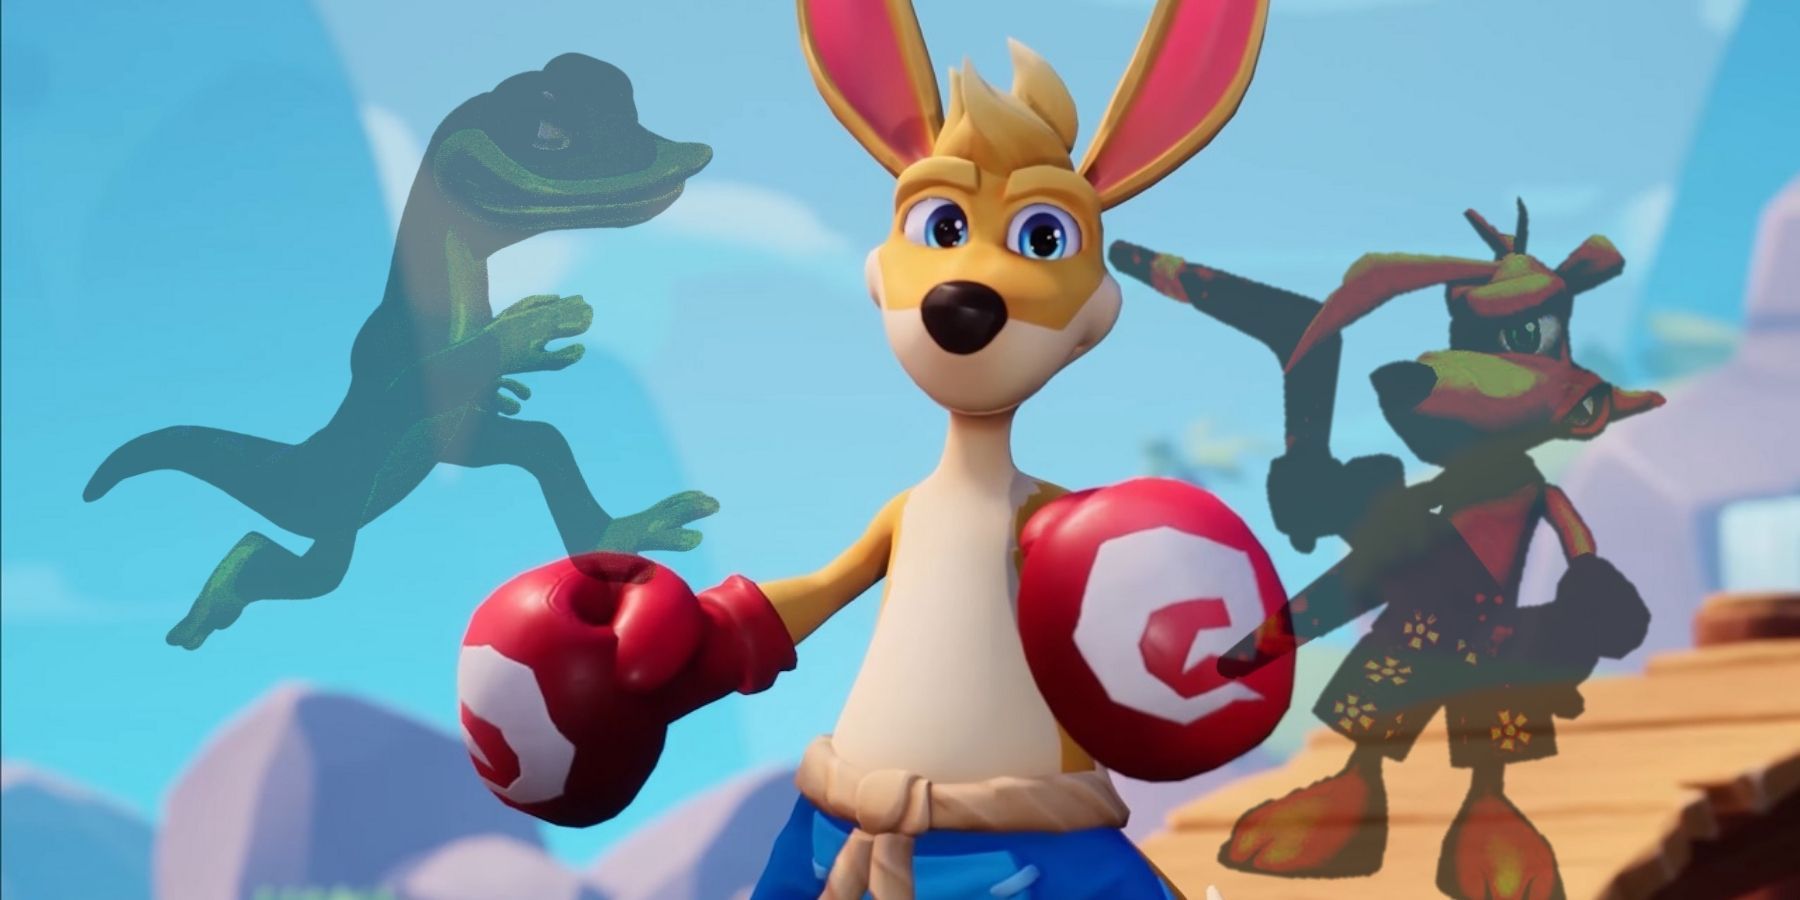 Dreamcast Platformer 'Kao The Kangaroo' Is Getting Rebooted This Summer